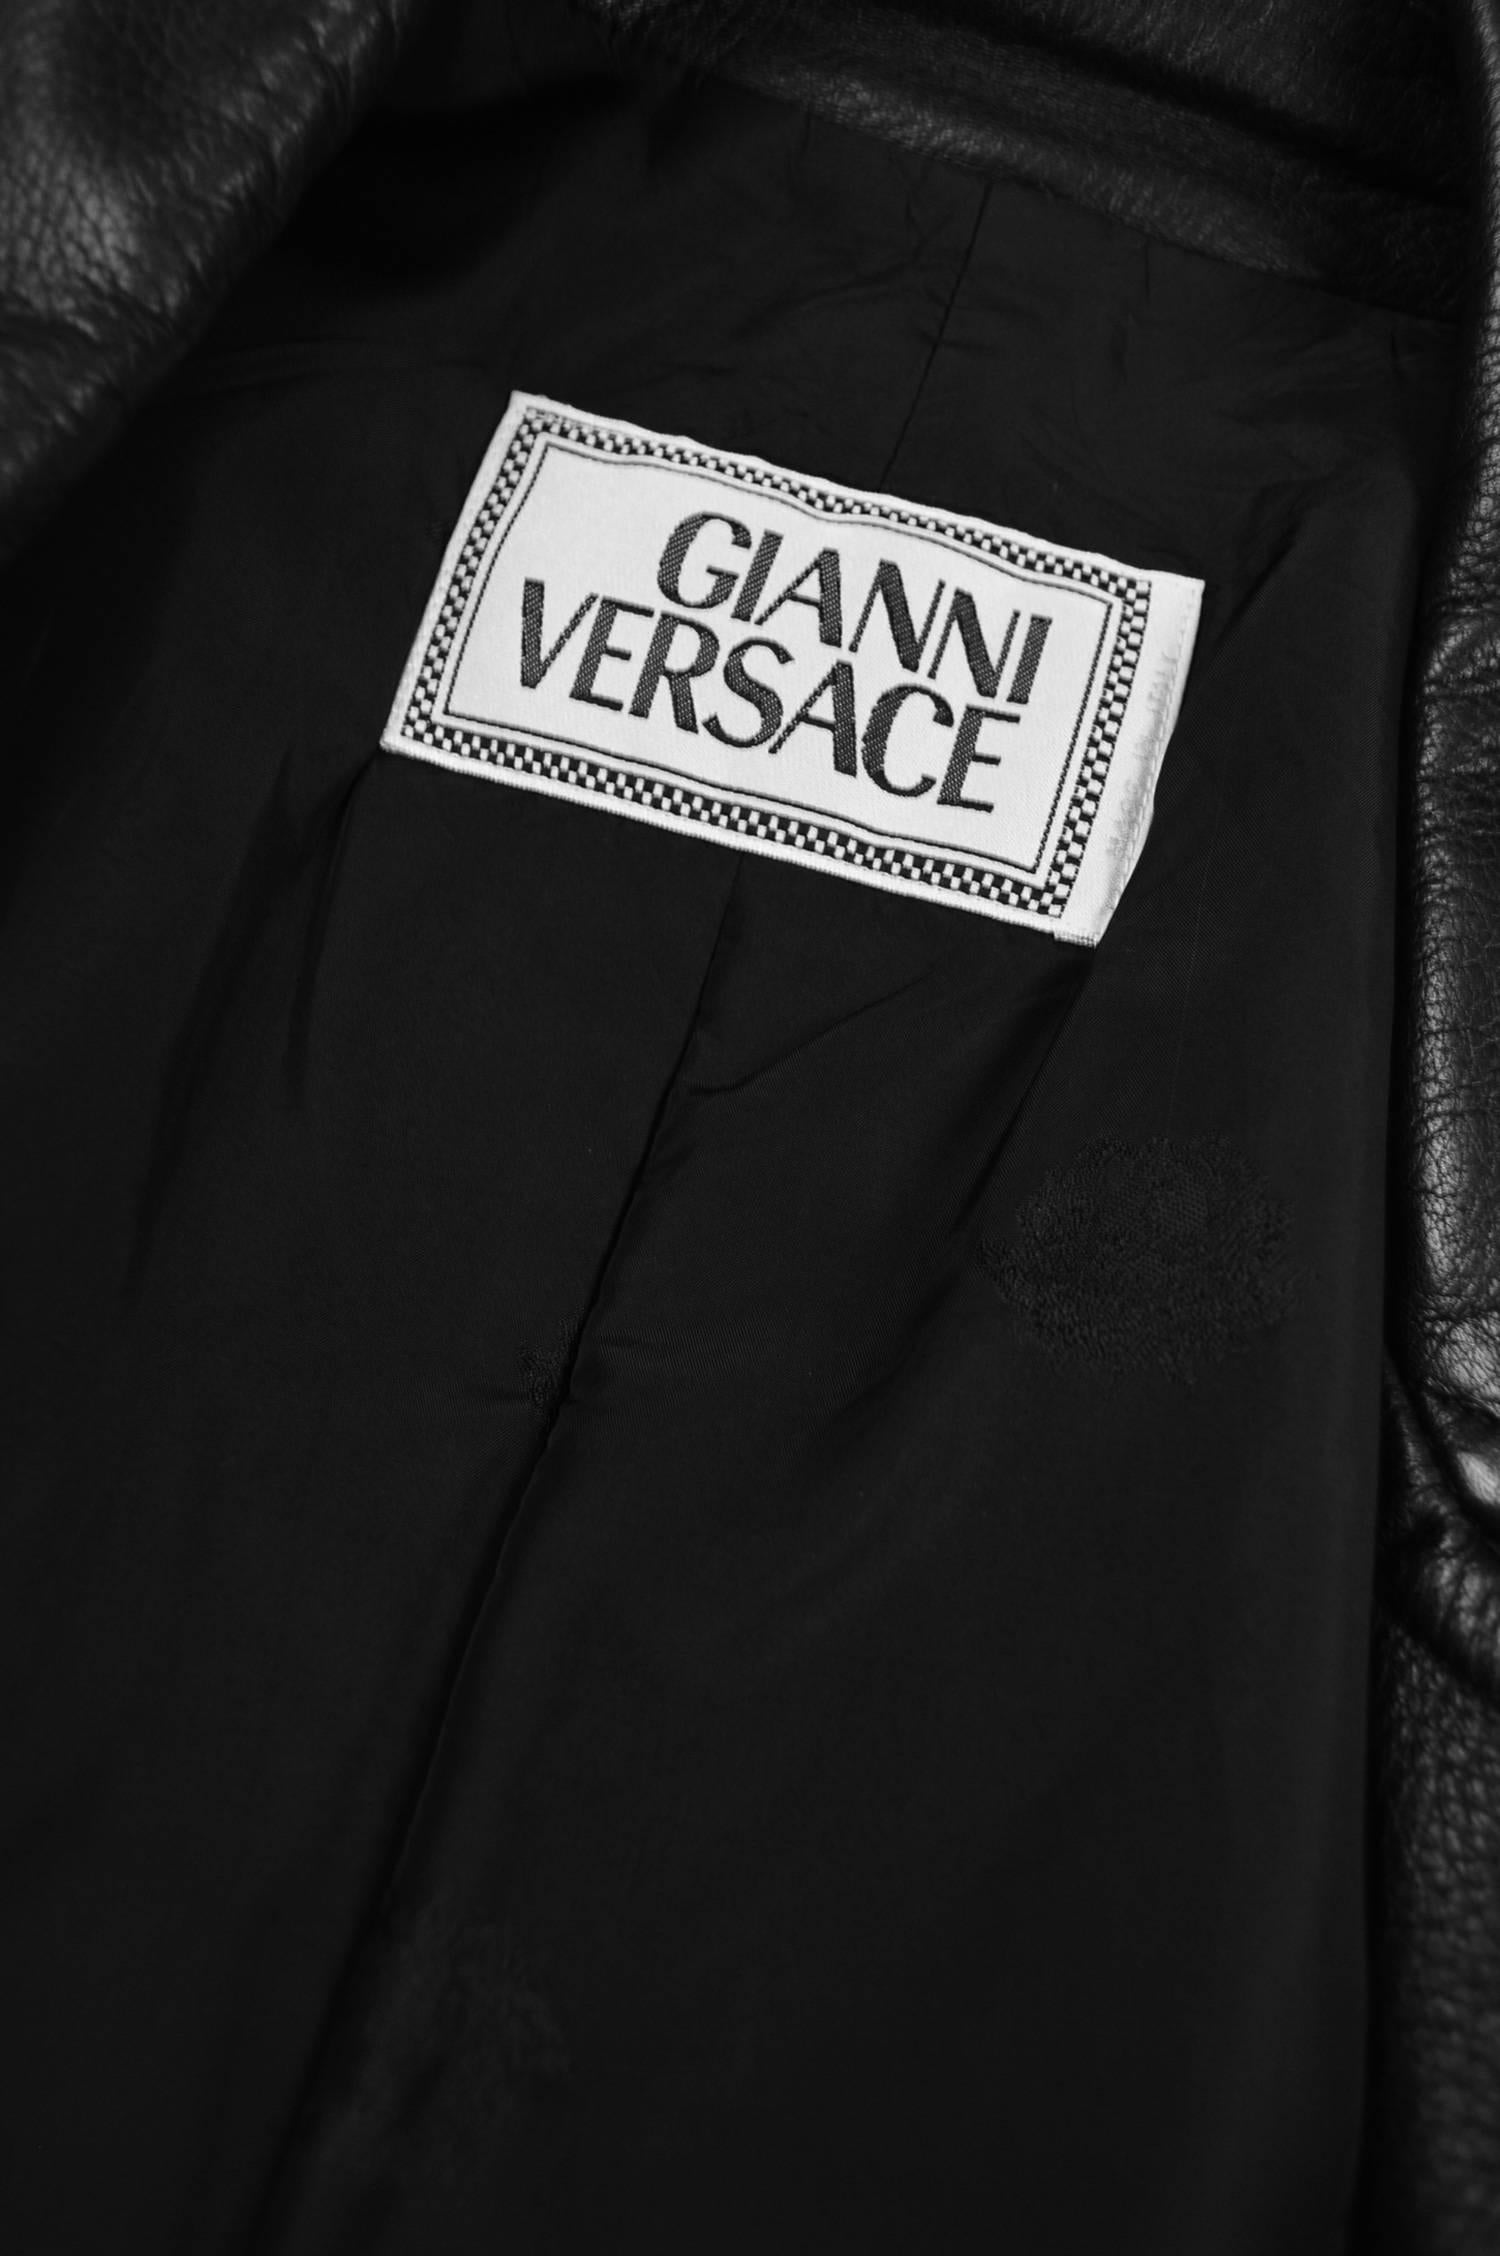 Gianni Versace Men's Black Leather Double Breasted Jacket, A/W 2002  7